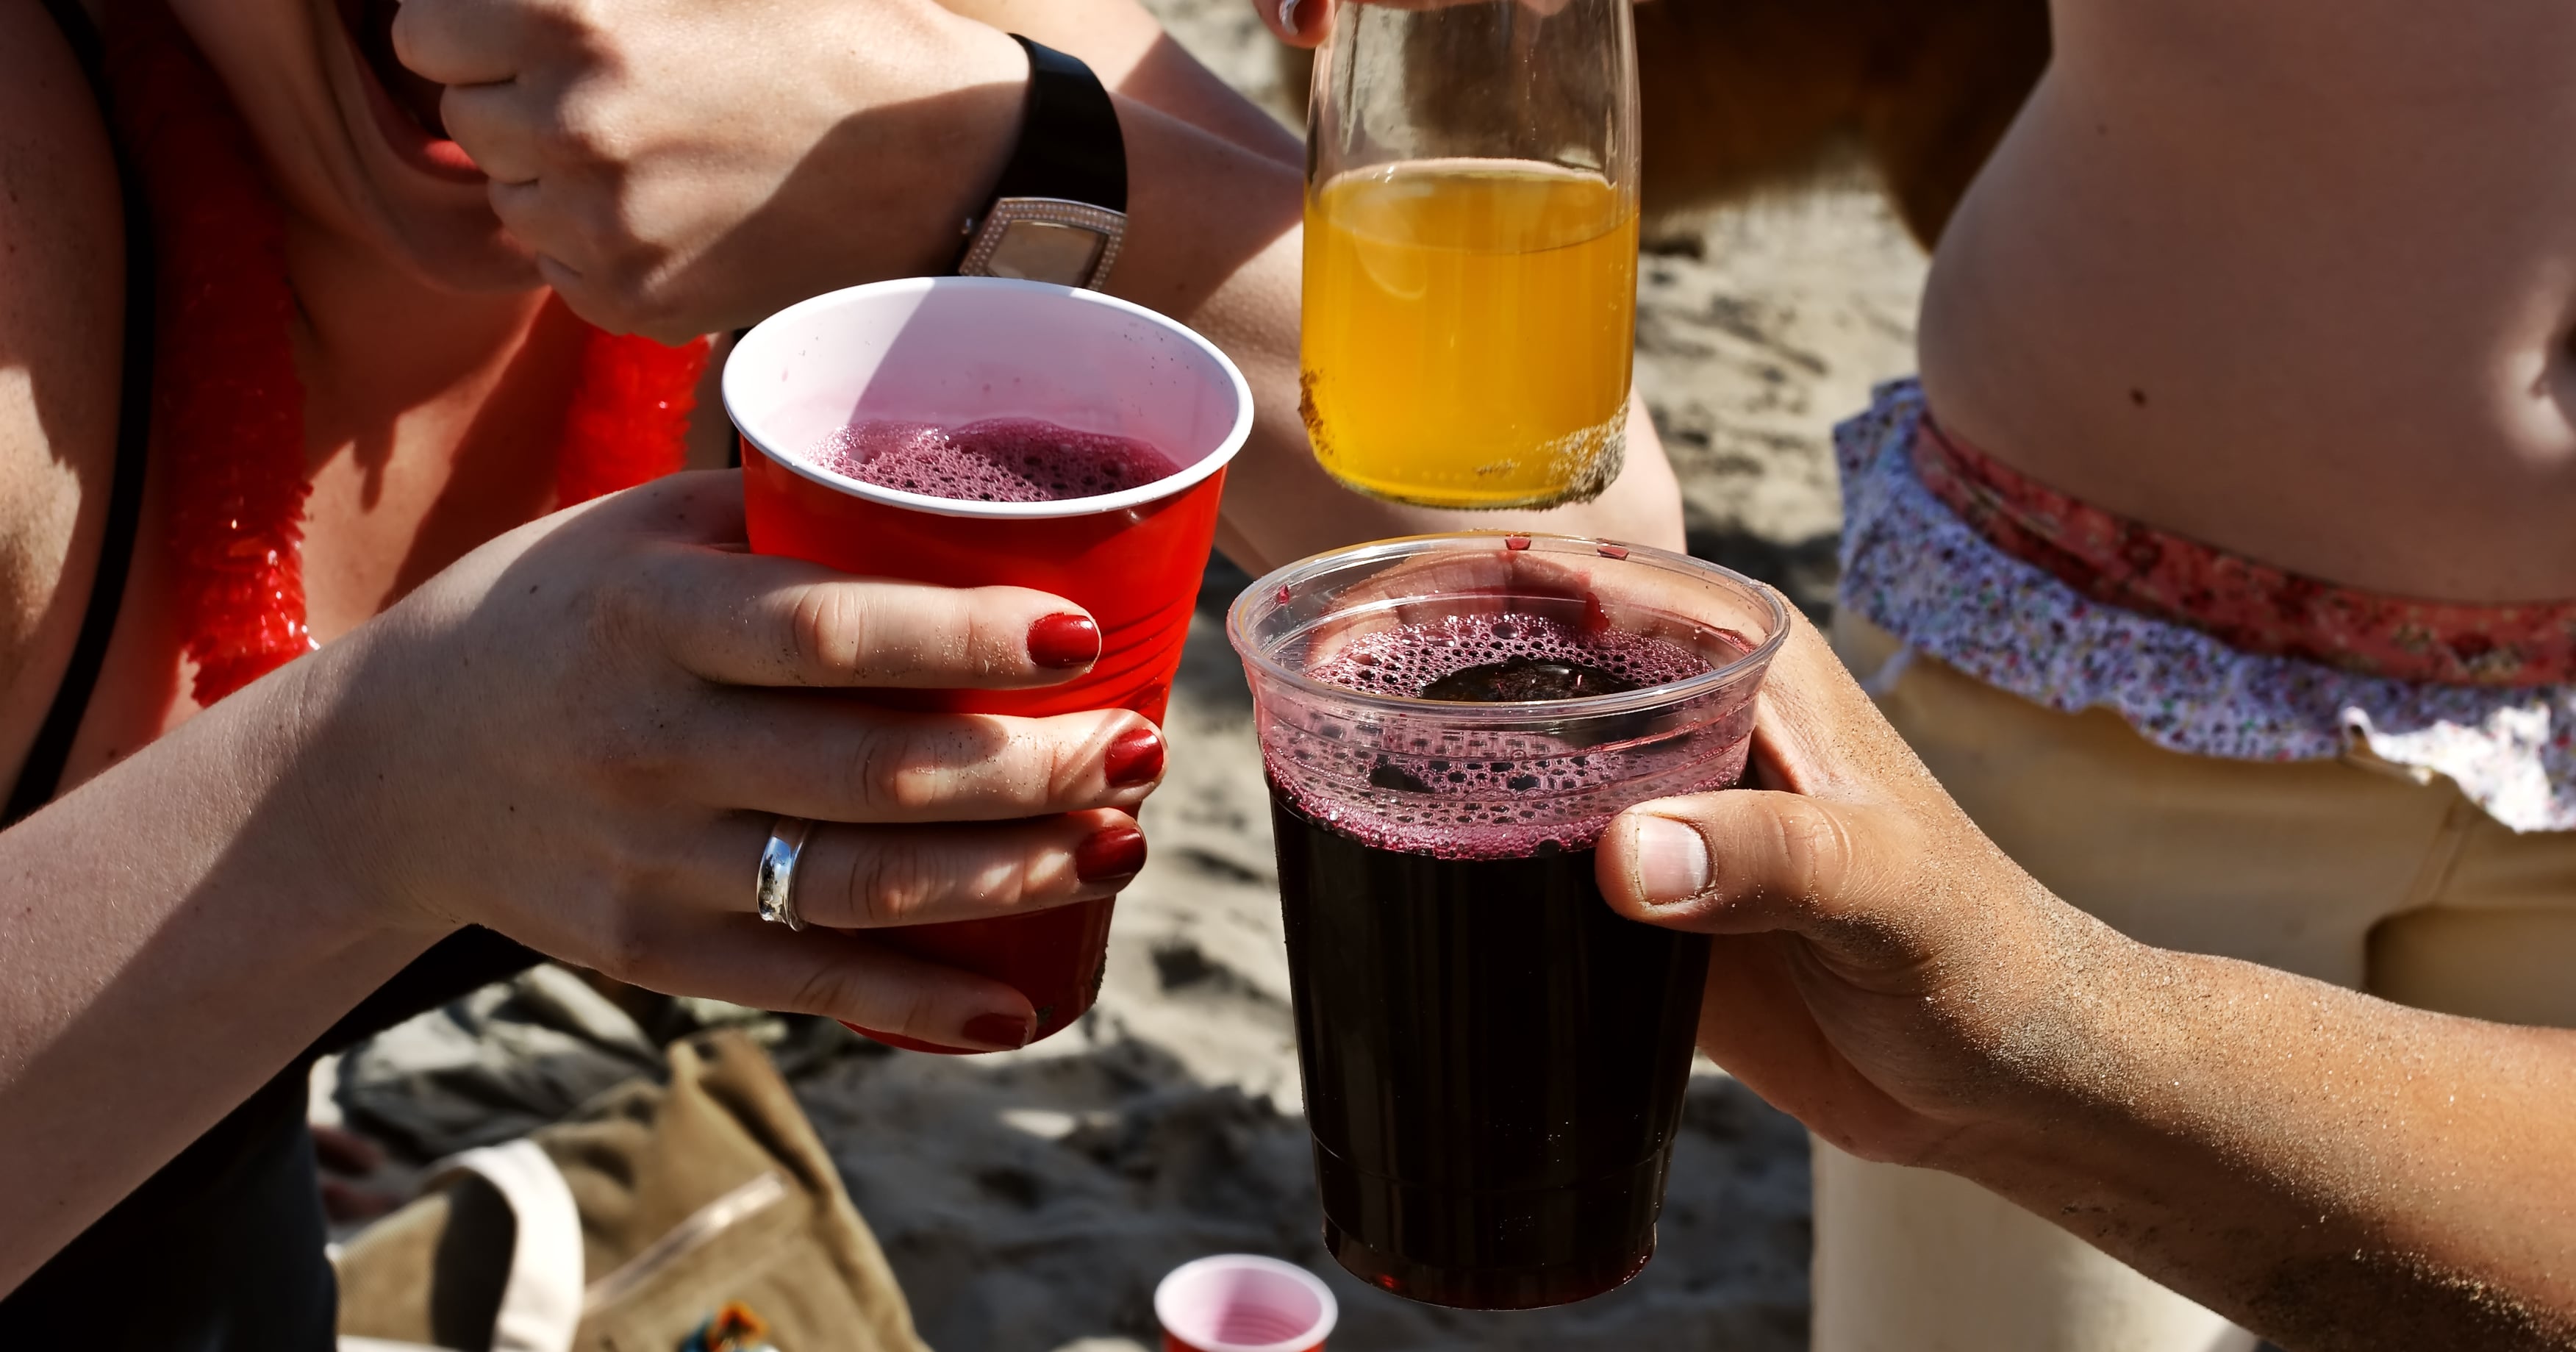 Research Says Gen Z Is Drinking Less. We Asked Teens If That’s True.